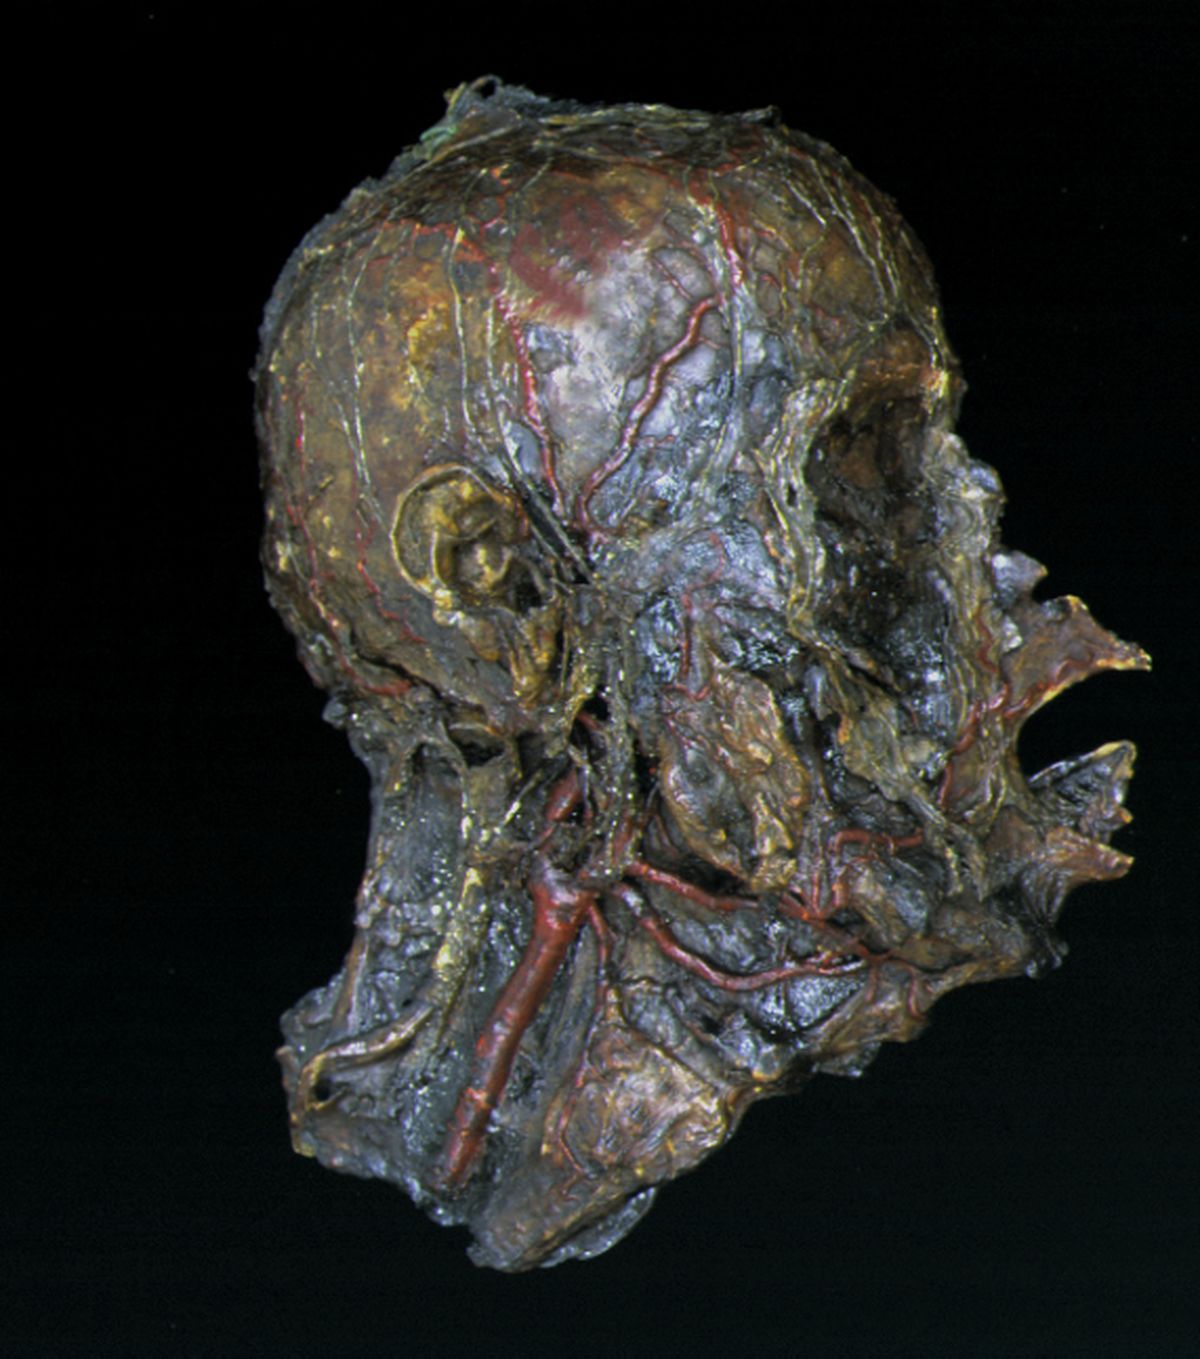 This is an example of a head showing different anatomical structures. This head has been fully dissected to show various blood vessels and connective tissues in great detail